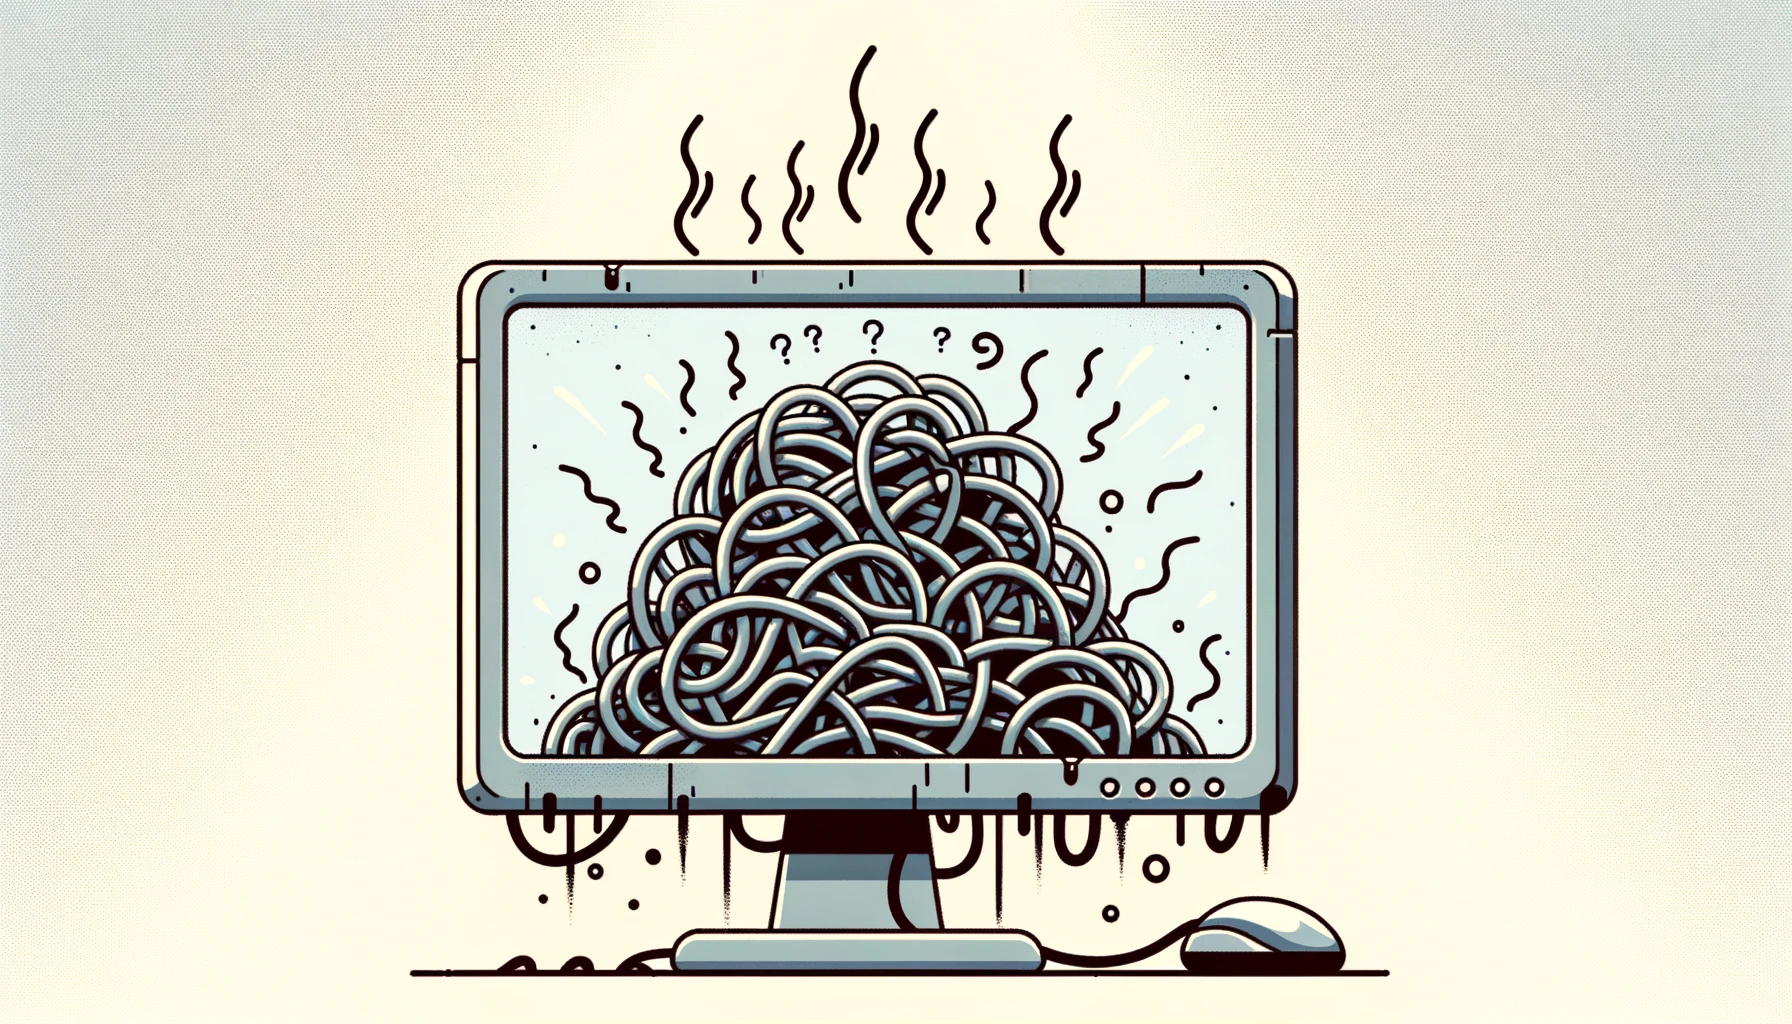 An illustration of tangled wires forming a knot inside a computer monitor, emitting steam and question marks, symbolizing the complexity and confusion associated with poor programming practices and the need for best practices for eliminating Python code smells.